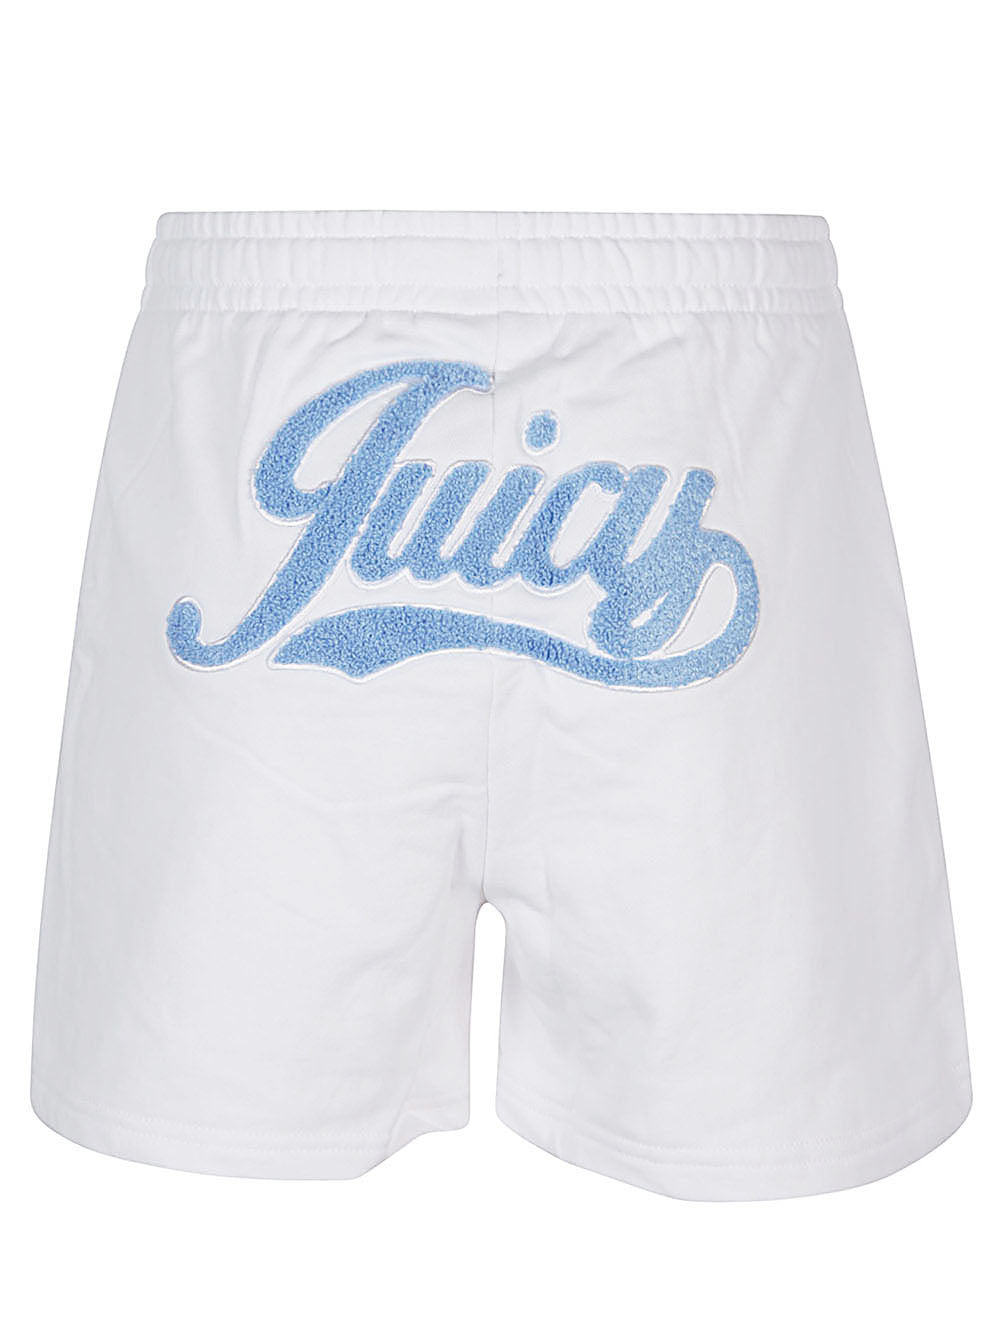 Juicy Couture Shorts White